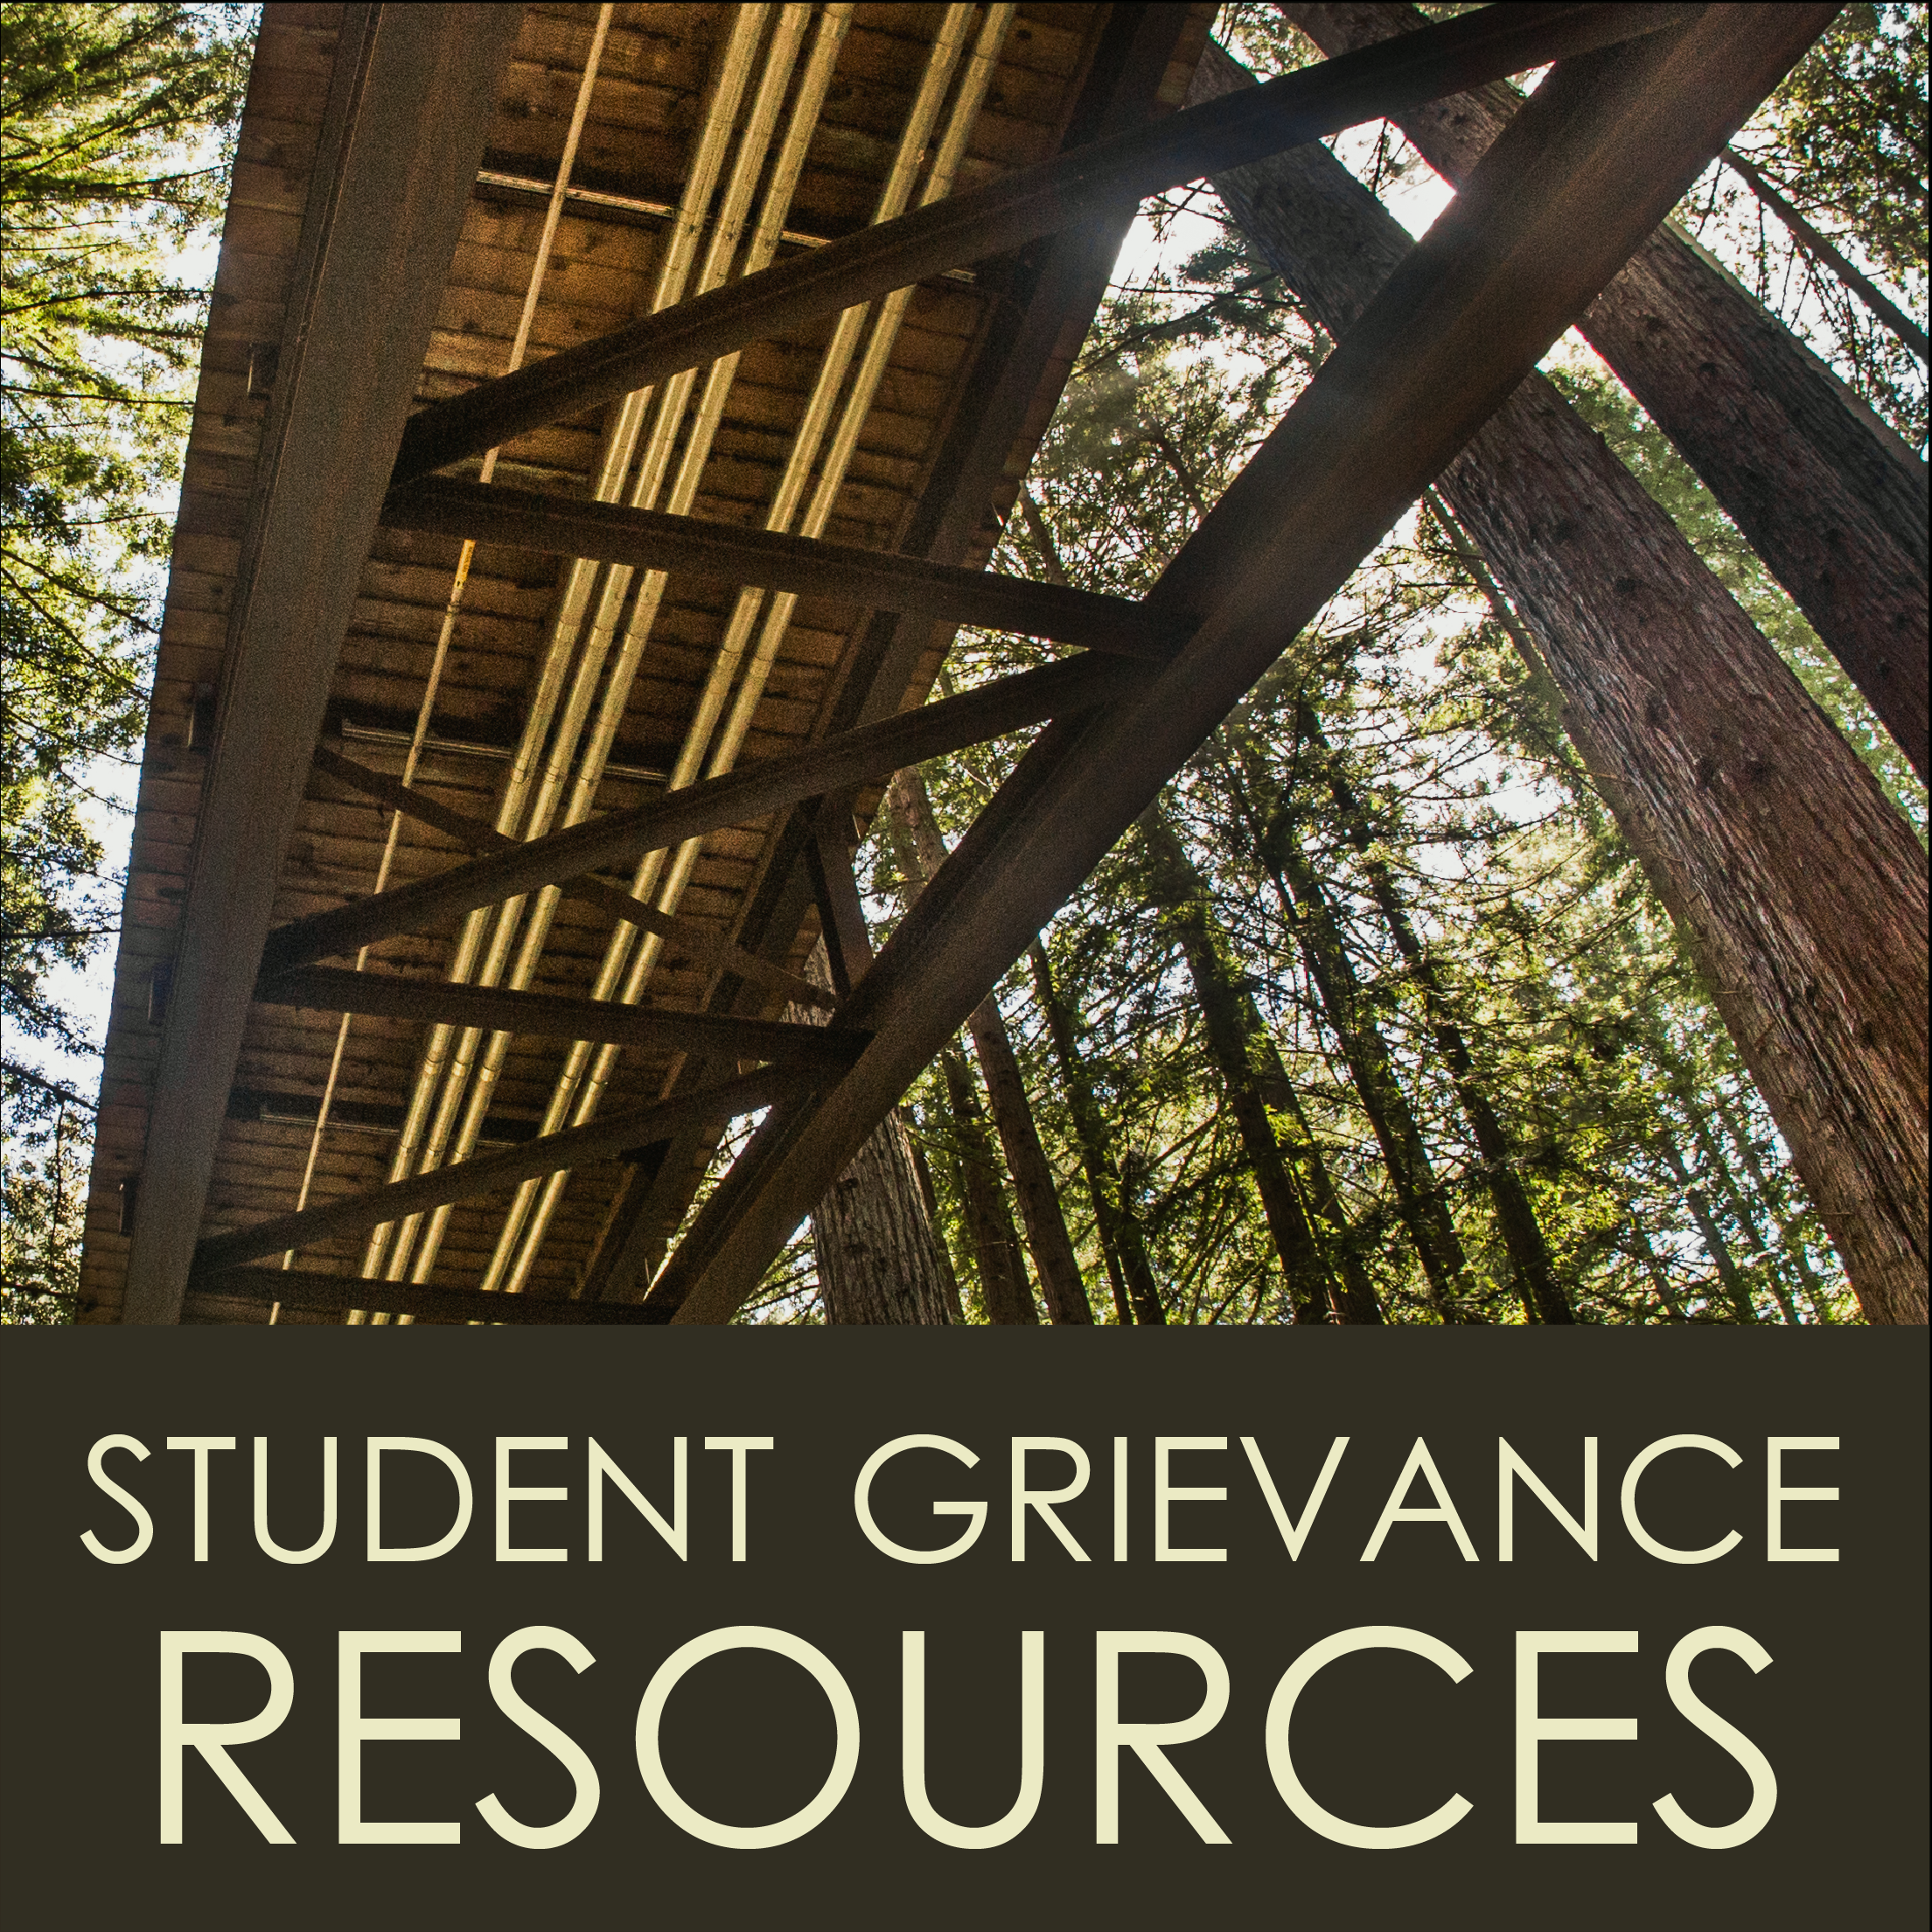 Student Grievance Resources